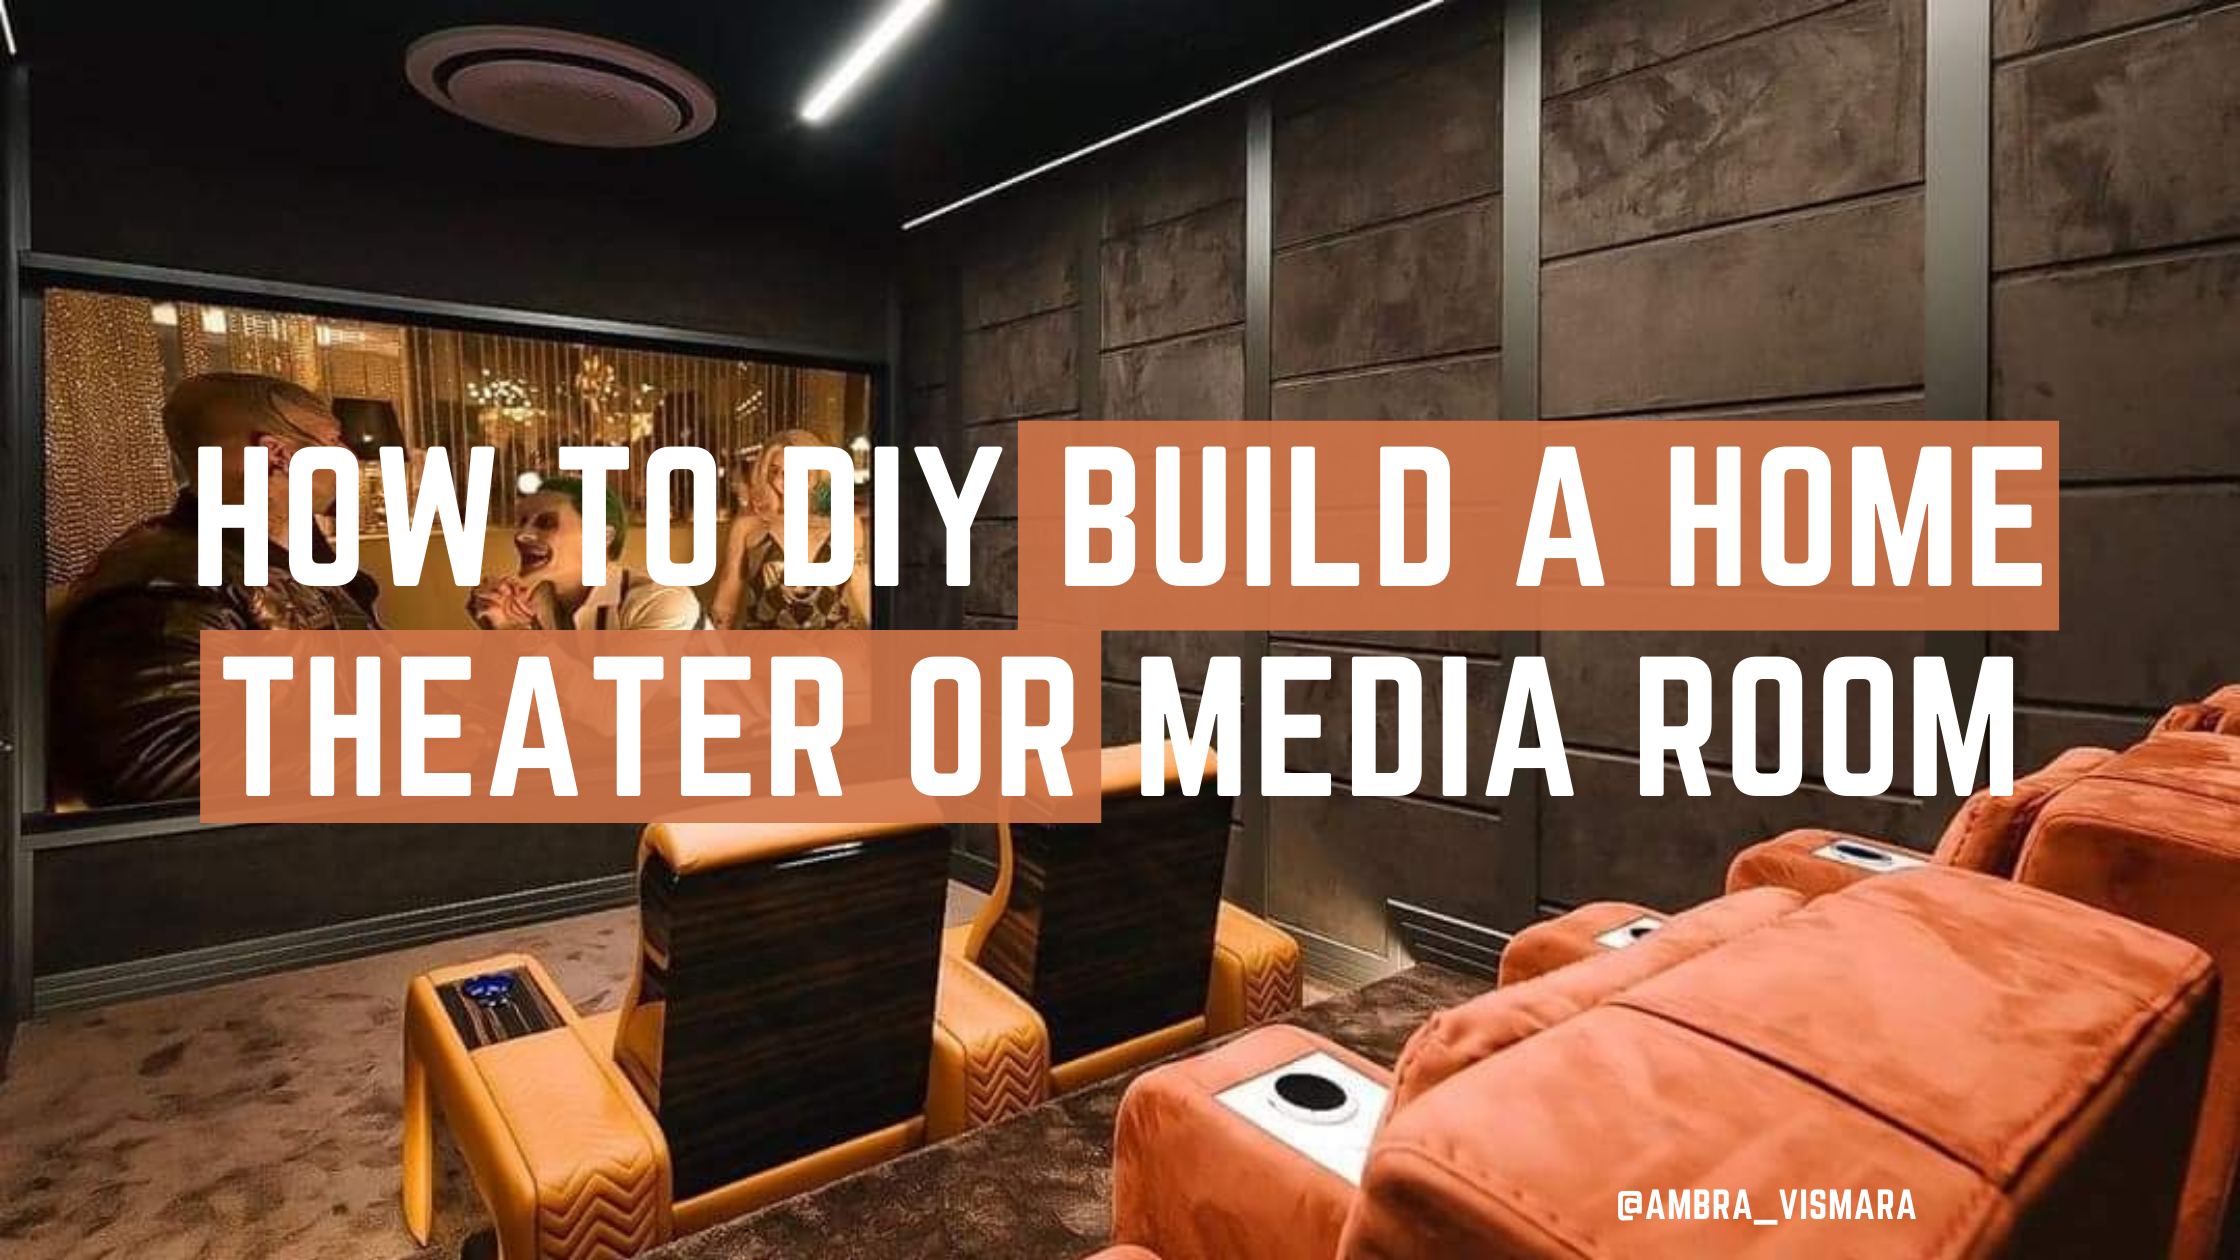 How to Build a Home Theater